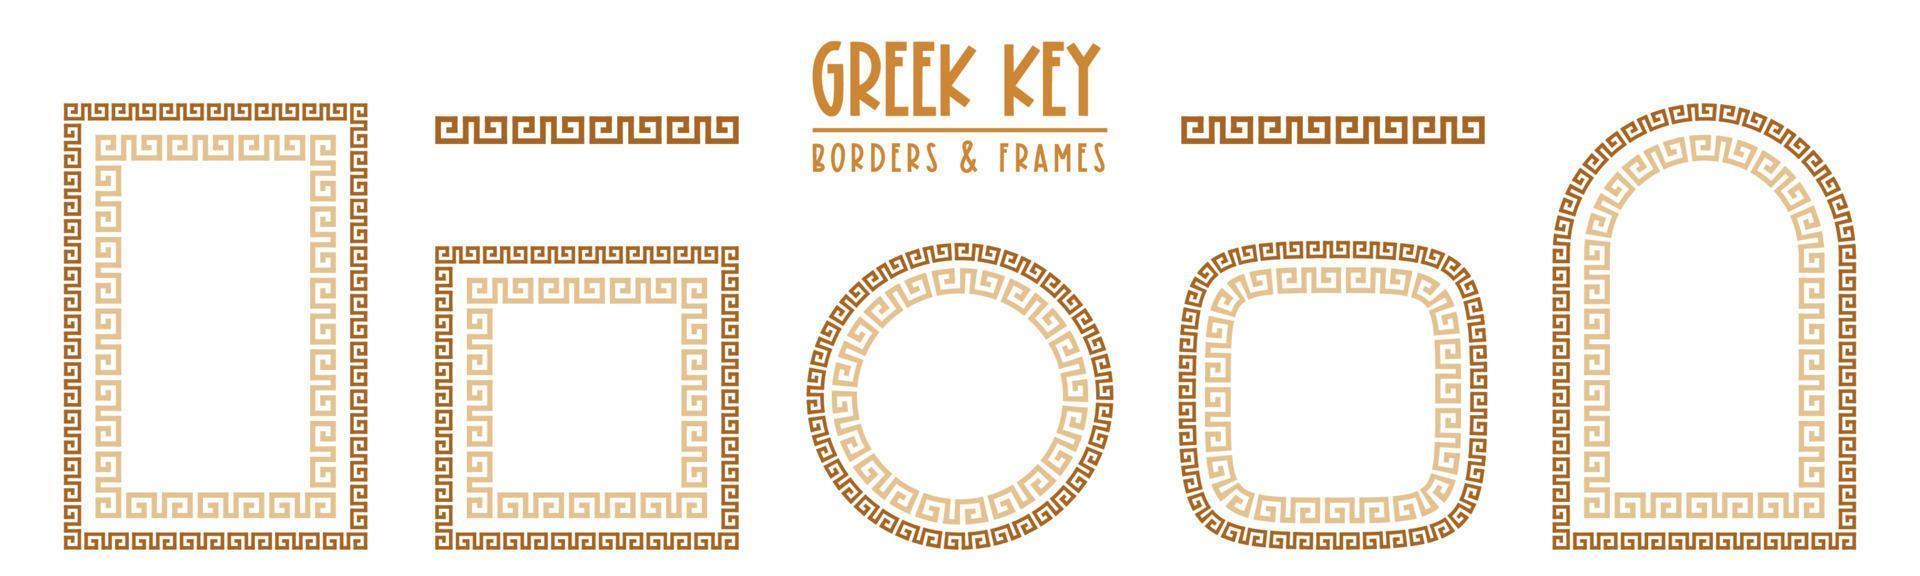 Greek key frames and borders collection. Decorative ancient meander, greece ornamental set, repeated geometric motif. Frames consist from tiny bricks, easy to resize or change frames proportion. vector